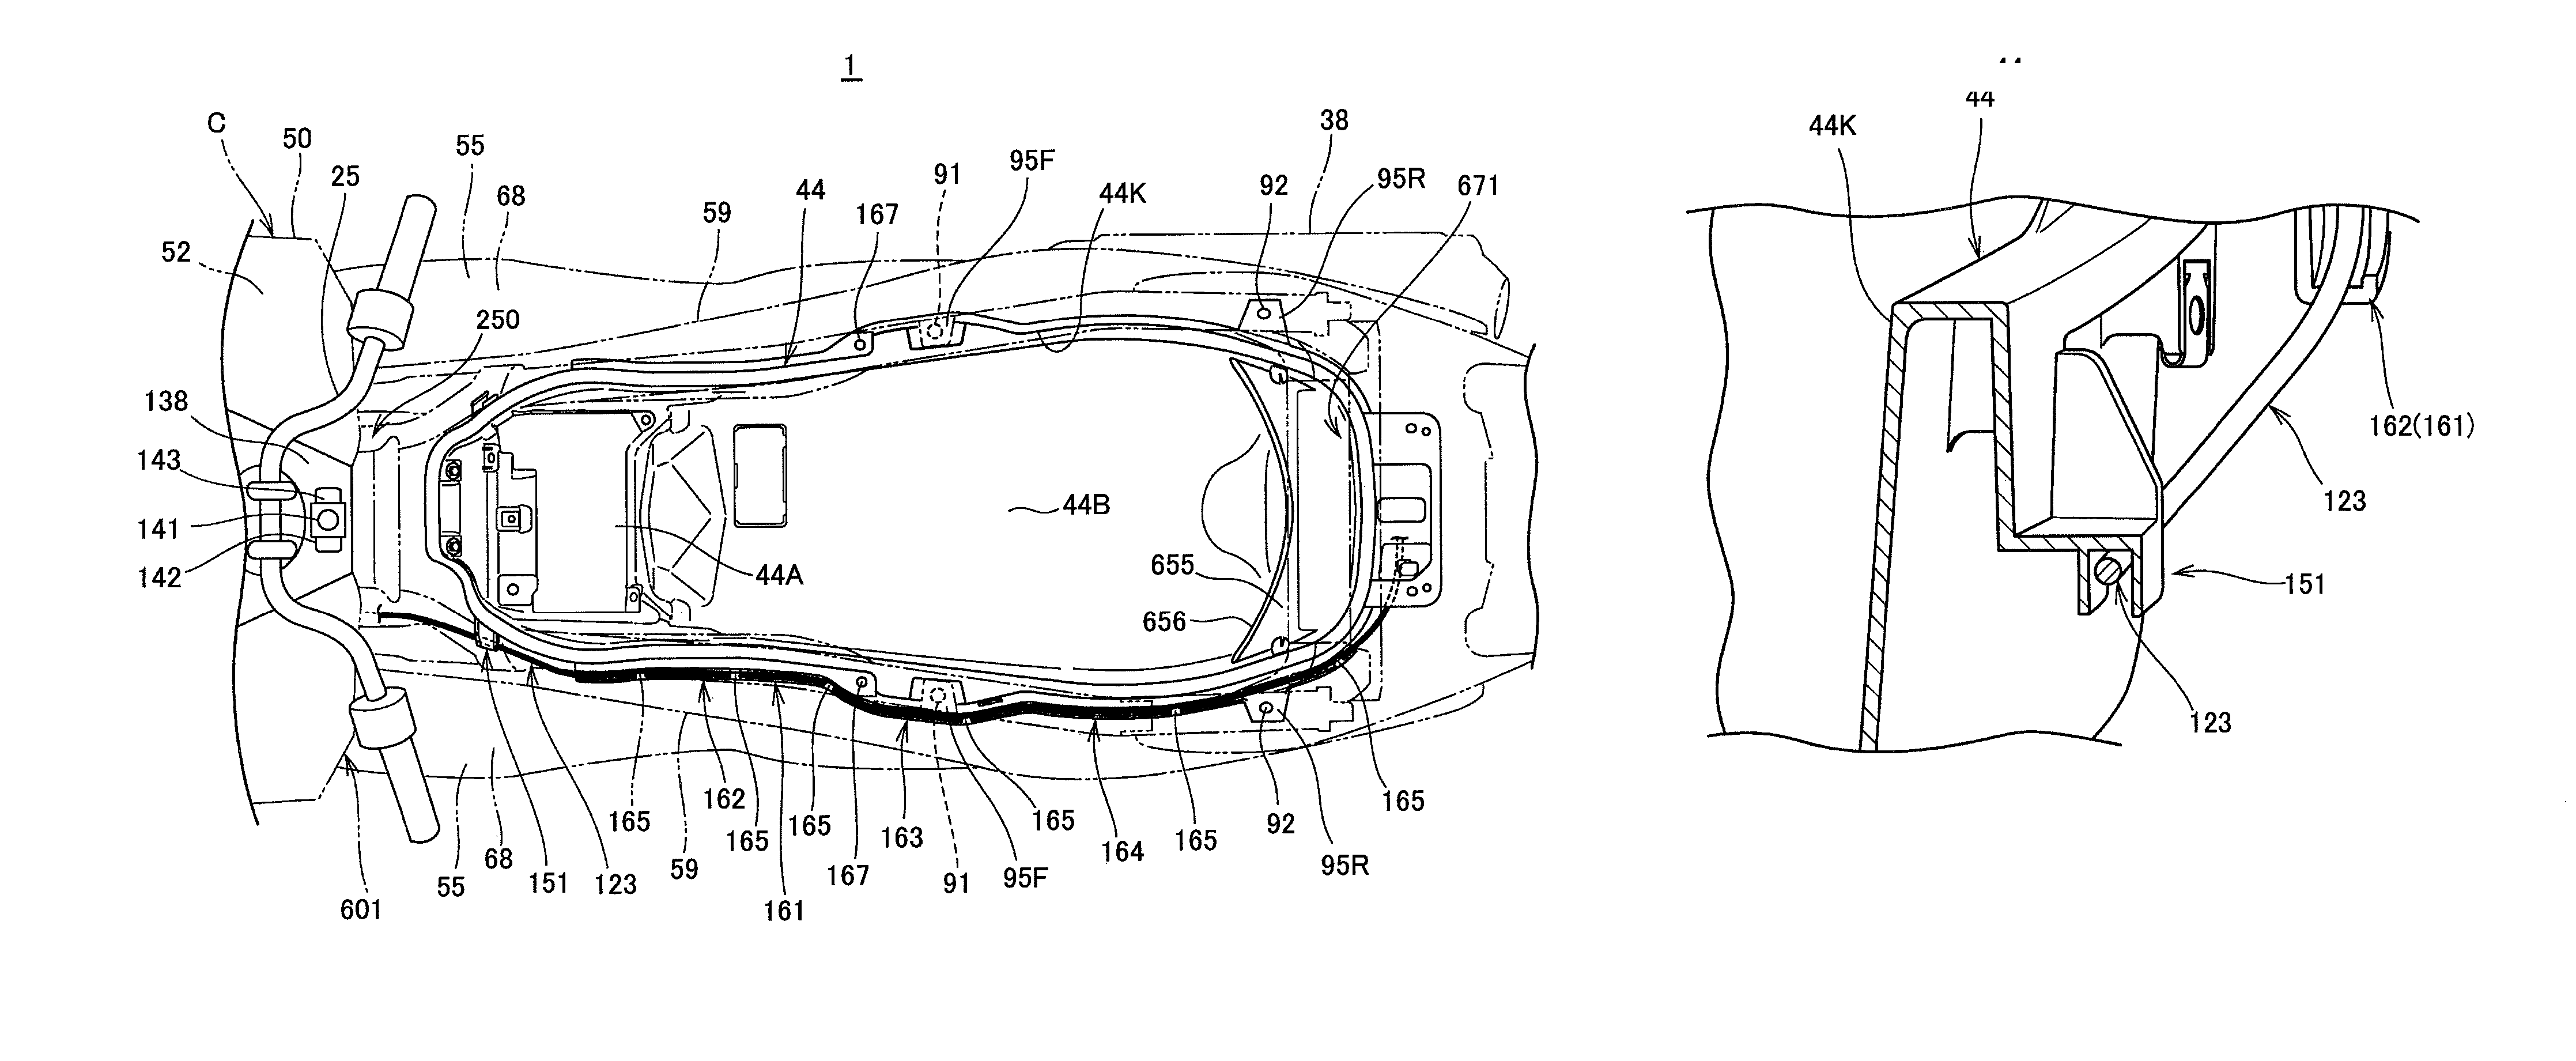 Routing structure for saddle type vehicle